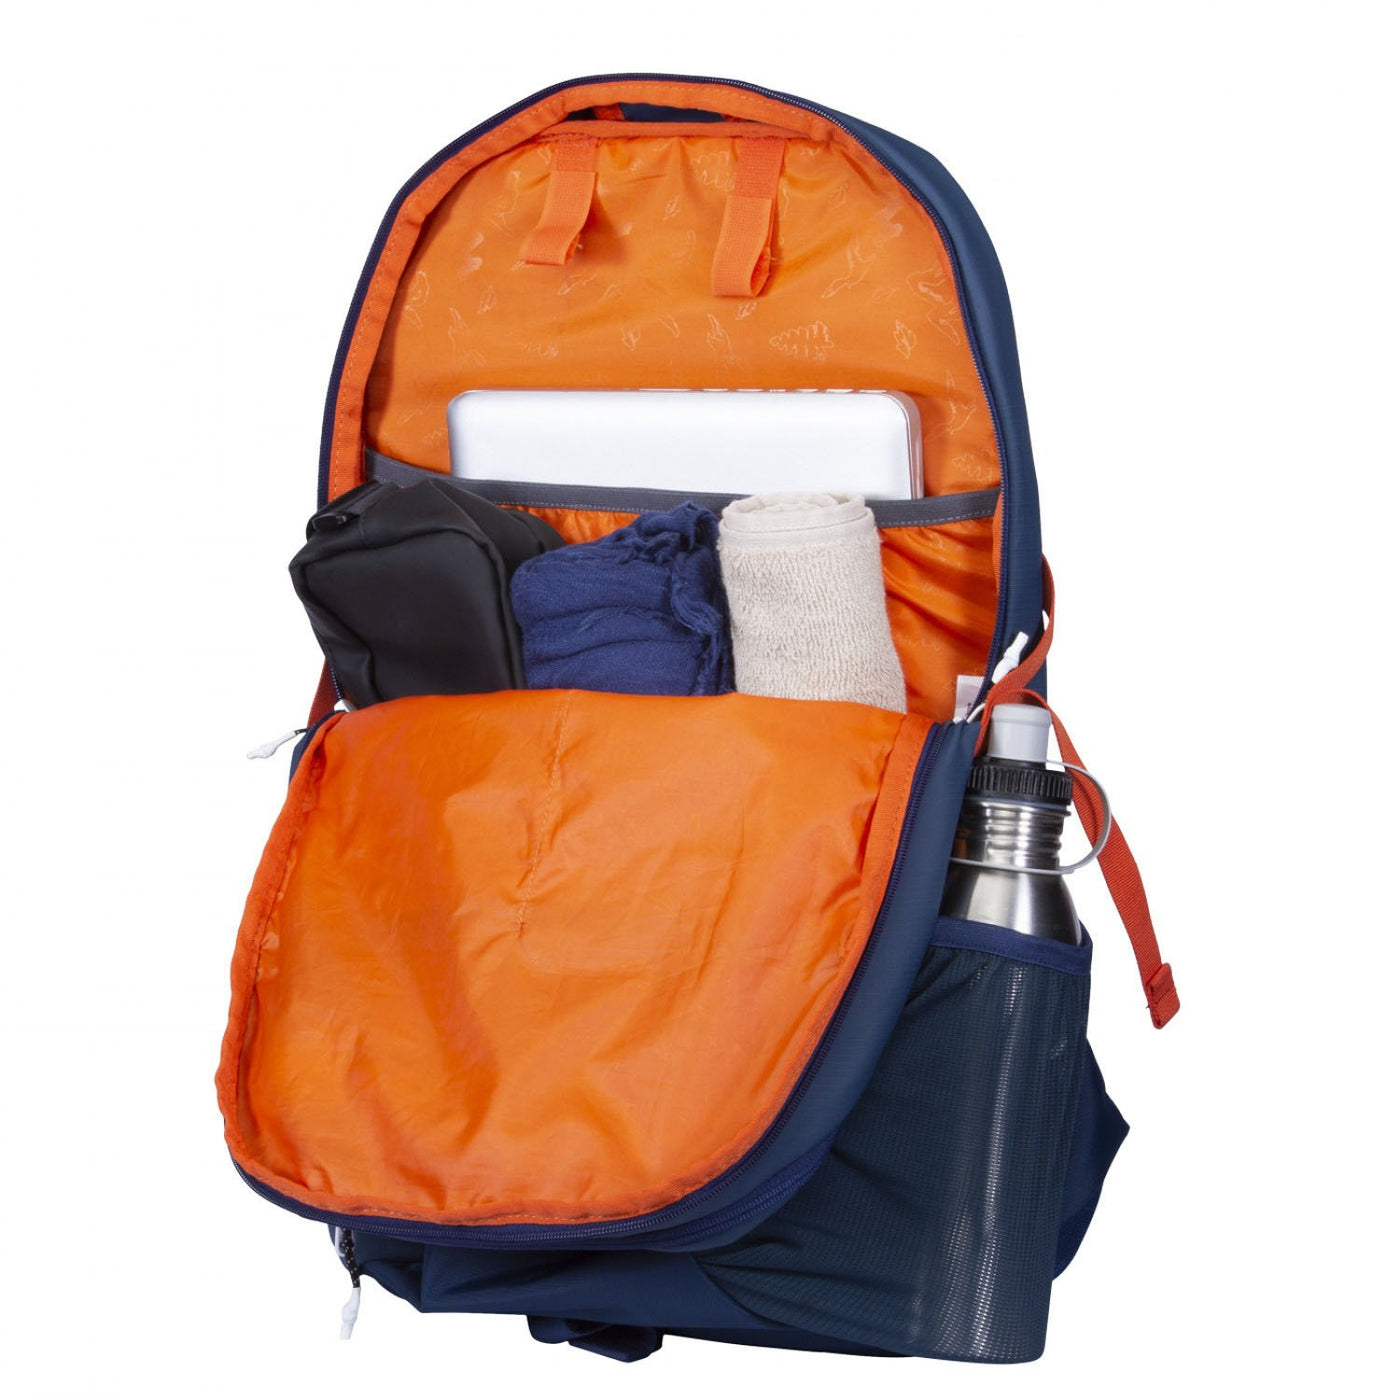 Firefox Techpack Backpack - 30 L - Cyclop.in